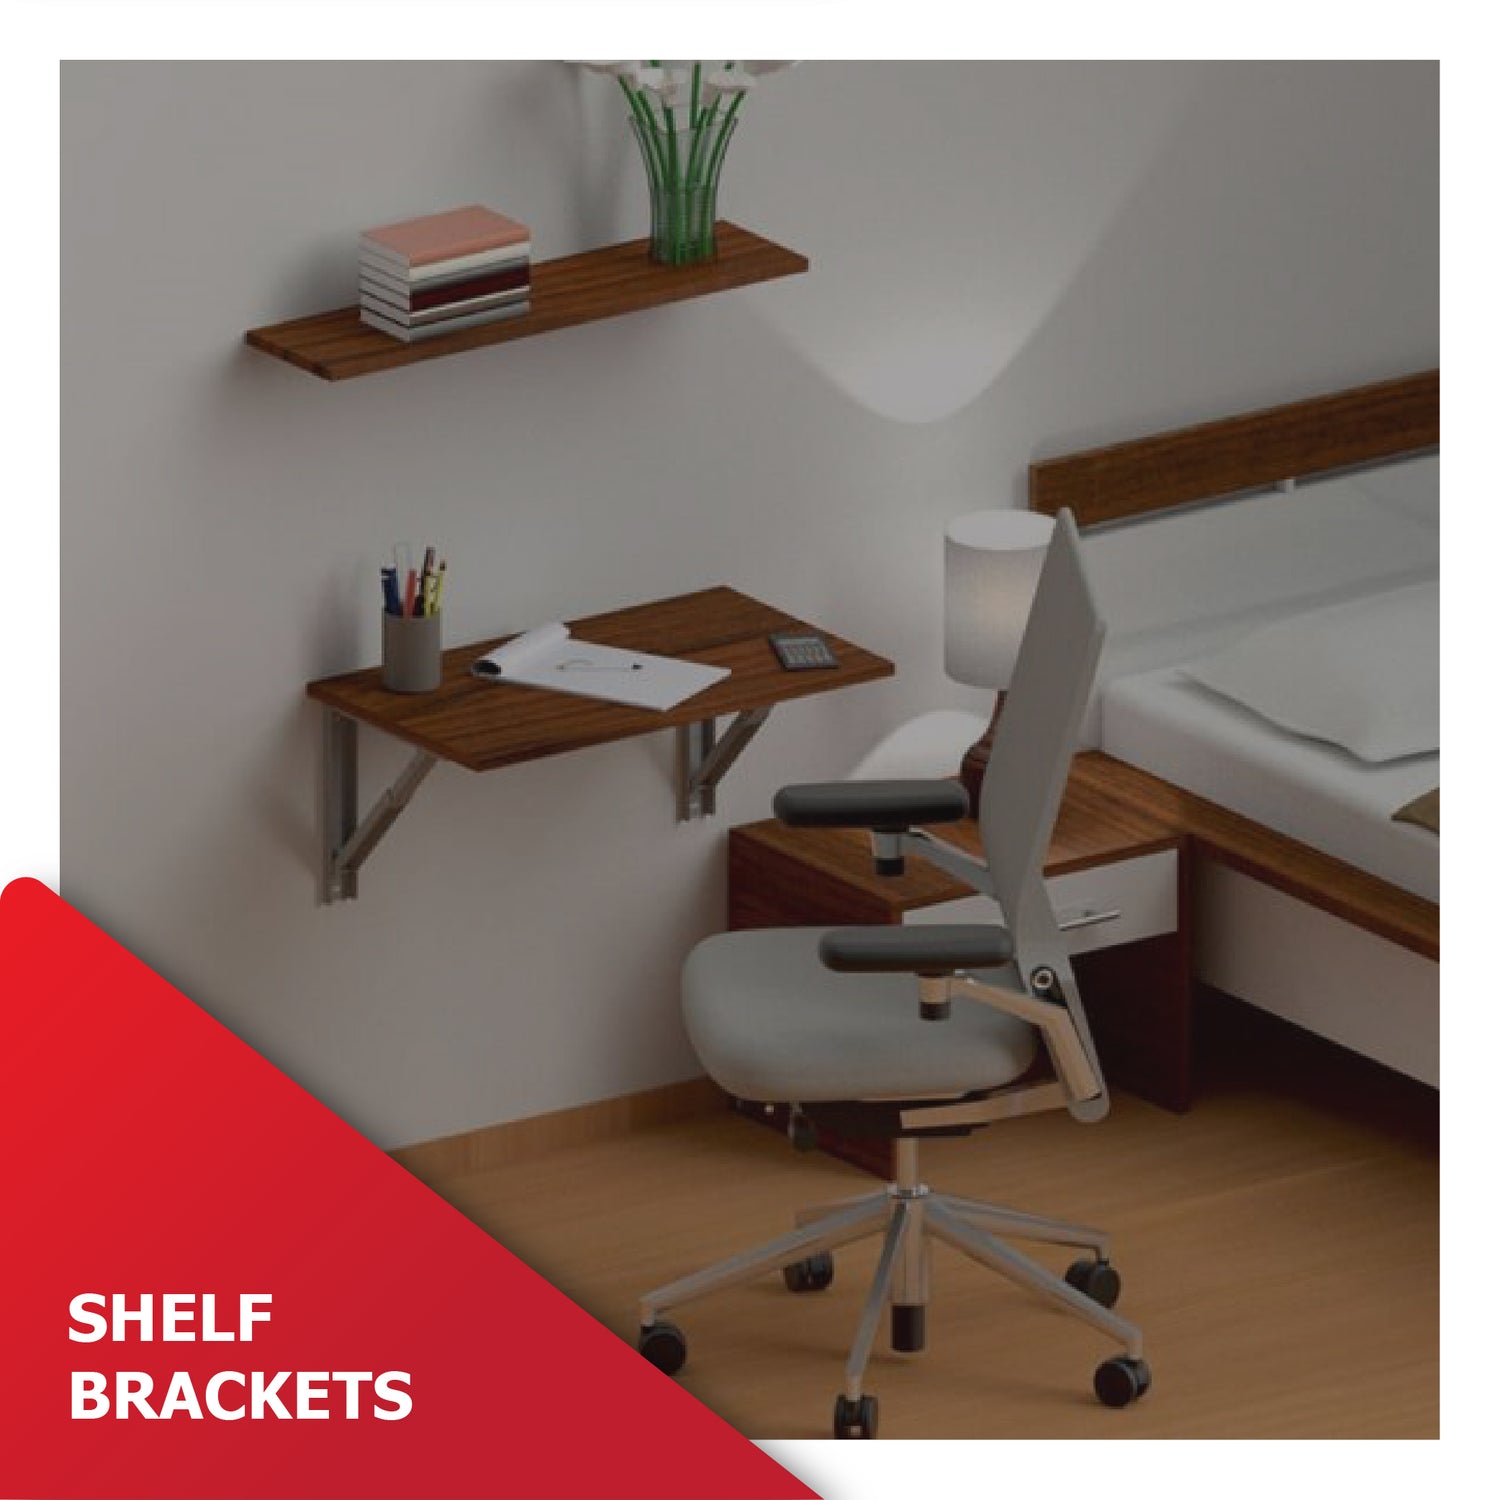 Shelf Brackets - Stylish and durable support for shelves. Shop now at M. M. Noorbhoy & Co.